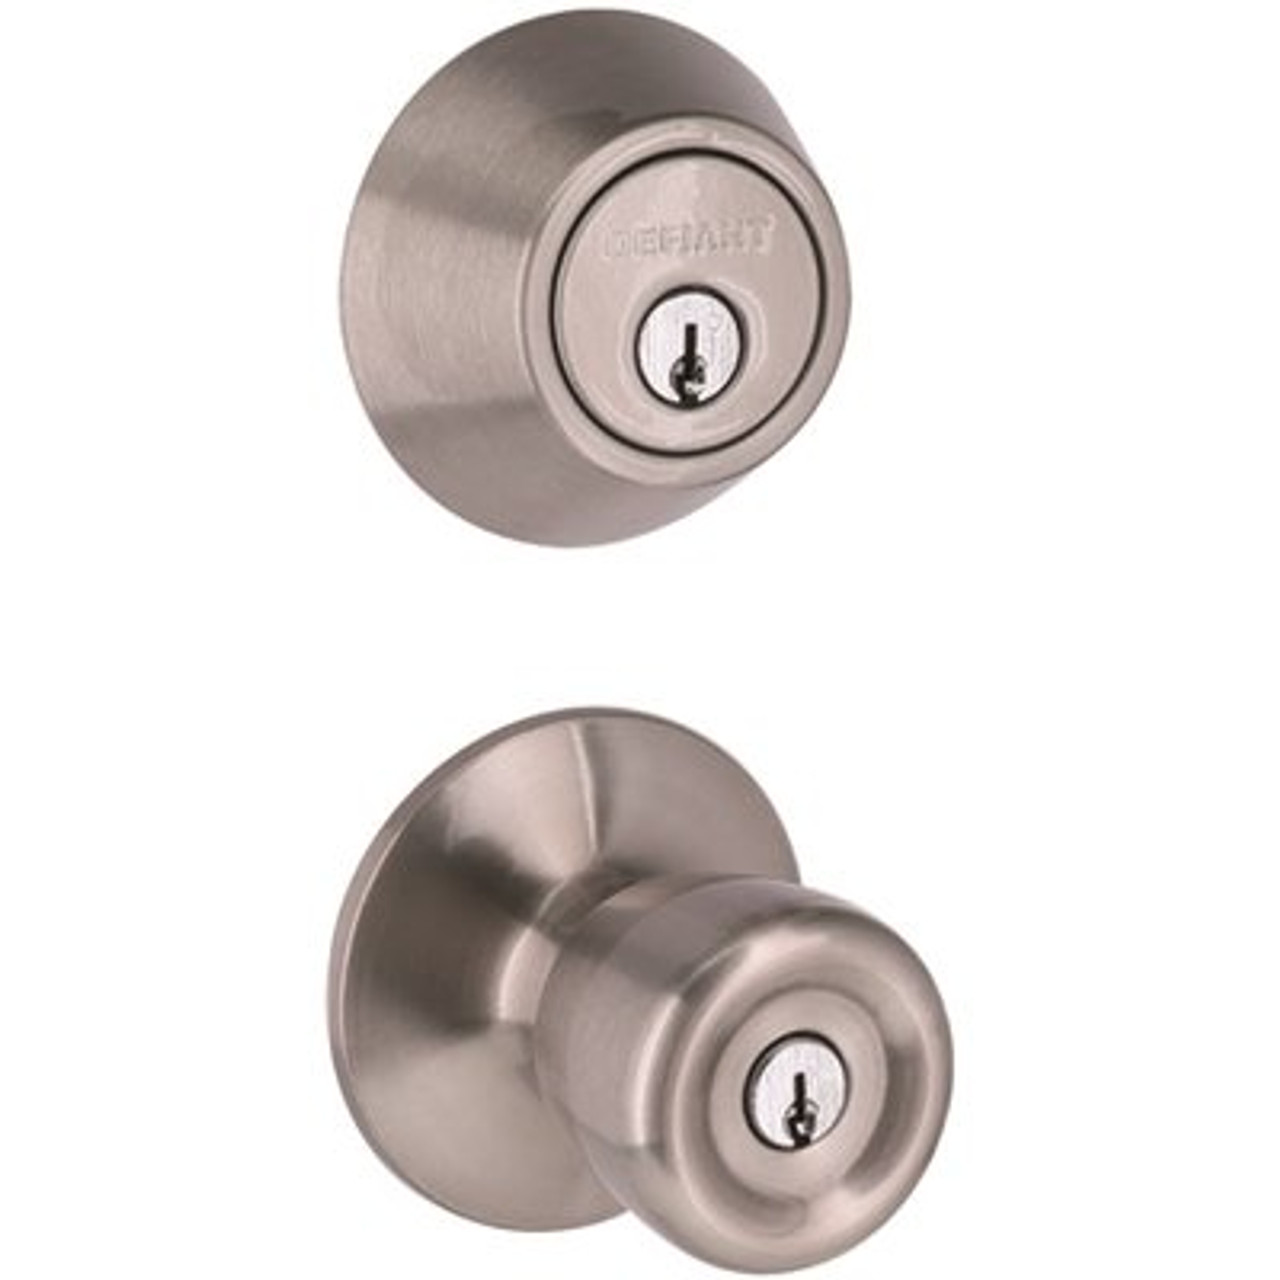 Waterbury Satin Nickel Keyed Entry Door Knob And Single Cylinder Deadbolt Combo Pack With Kw1 Keyway Keyed Differently